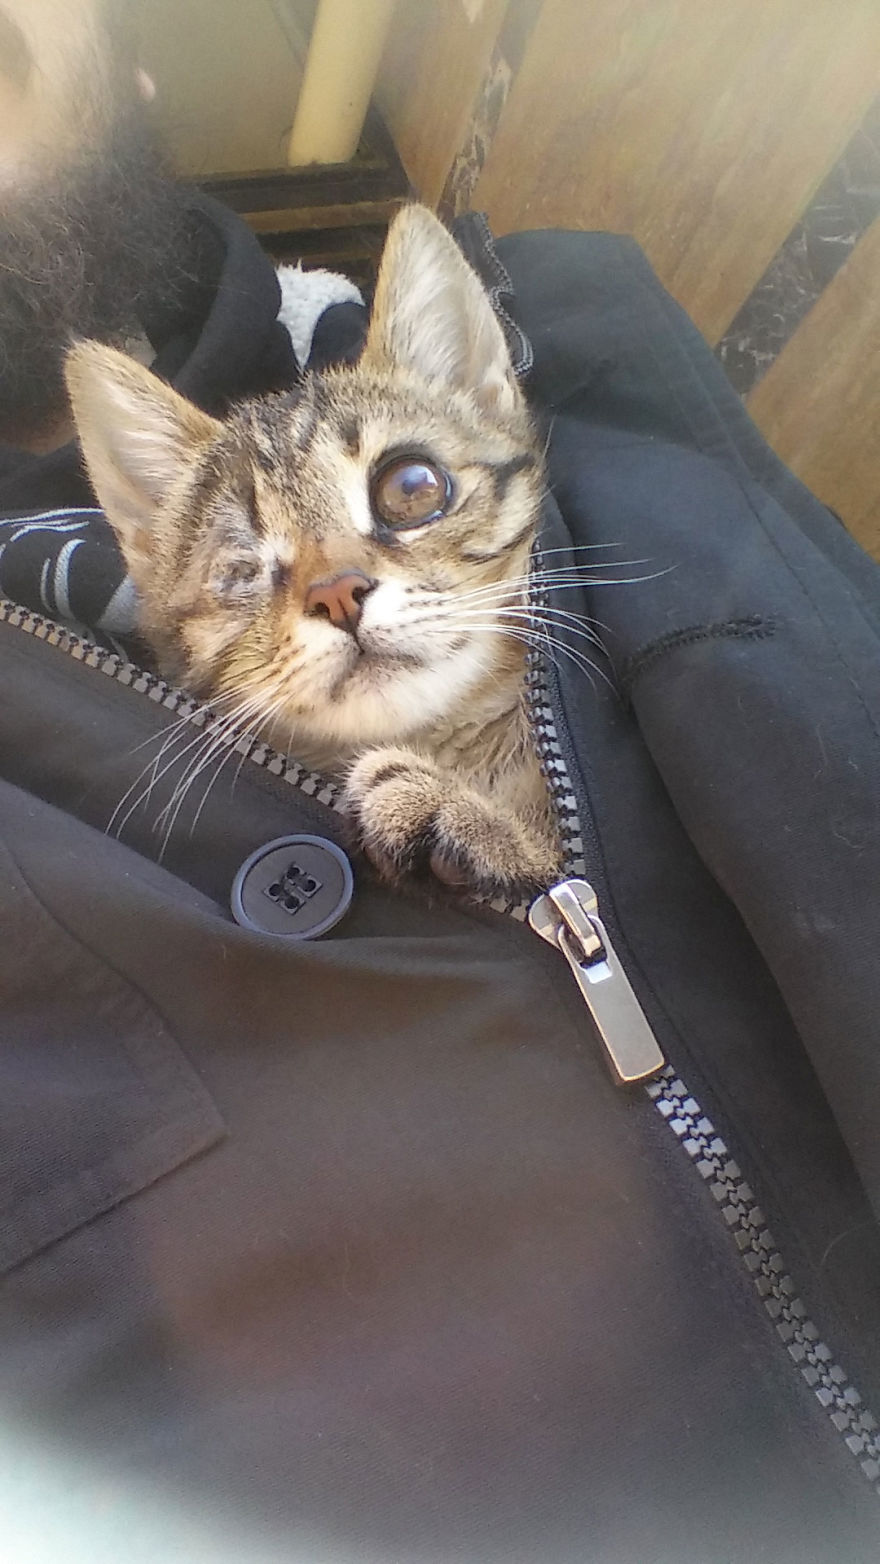 Guy Finds A Dying Kitten With Only One Eye In The Streets, Does Everything He Can To Save Her Life